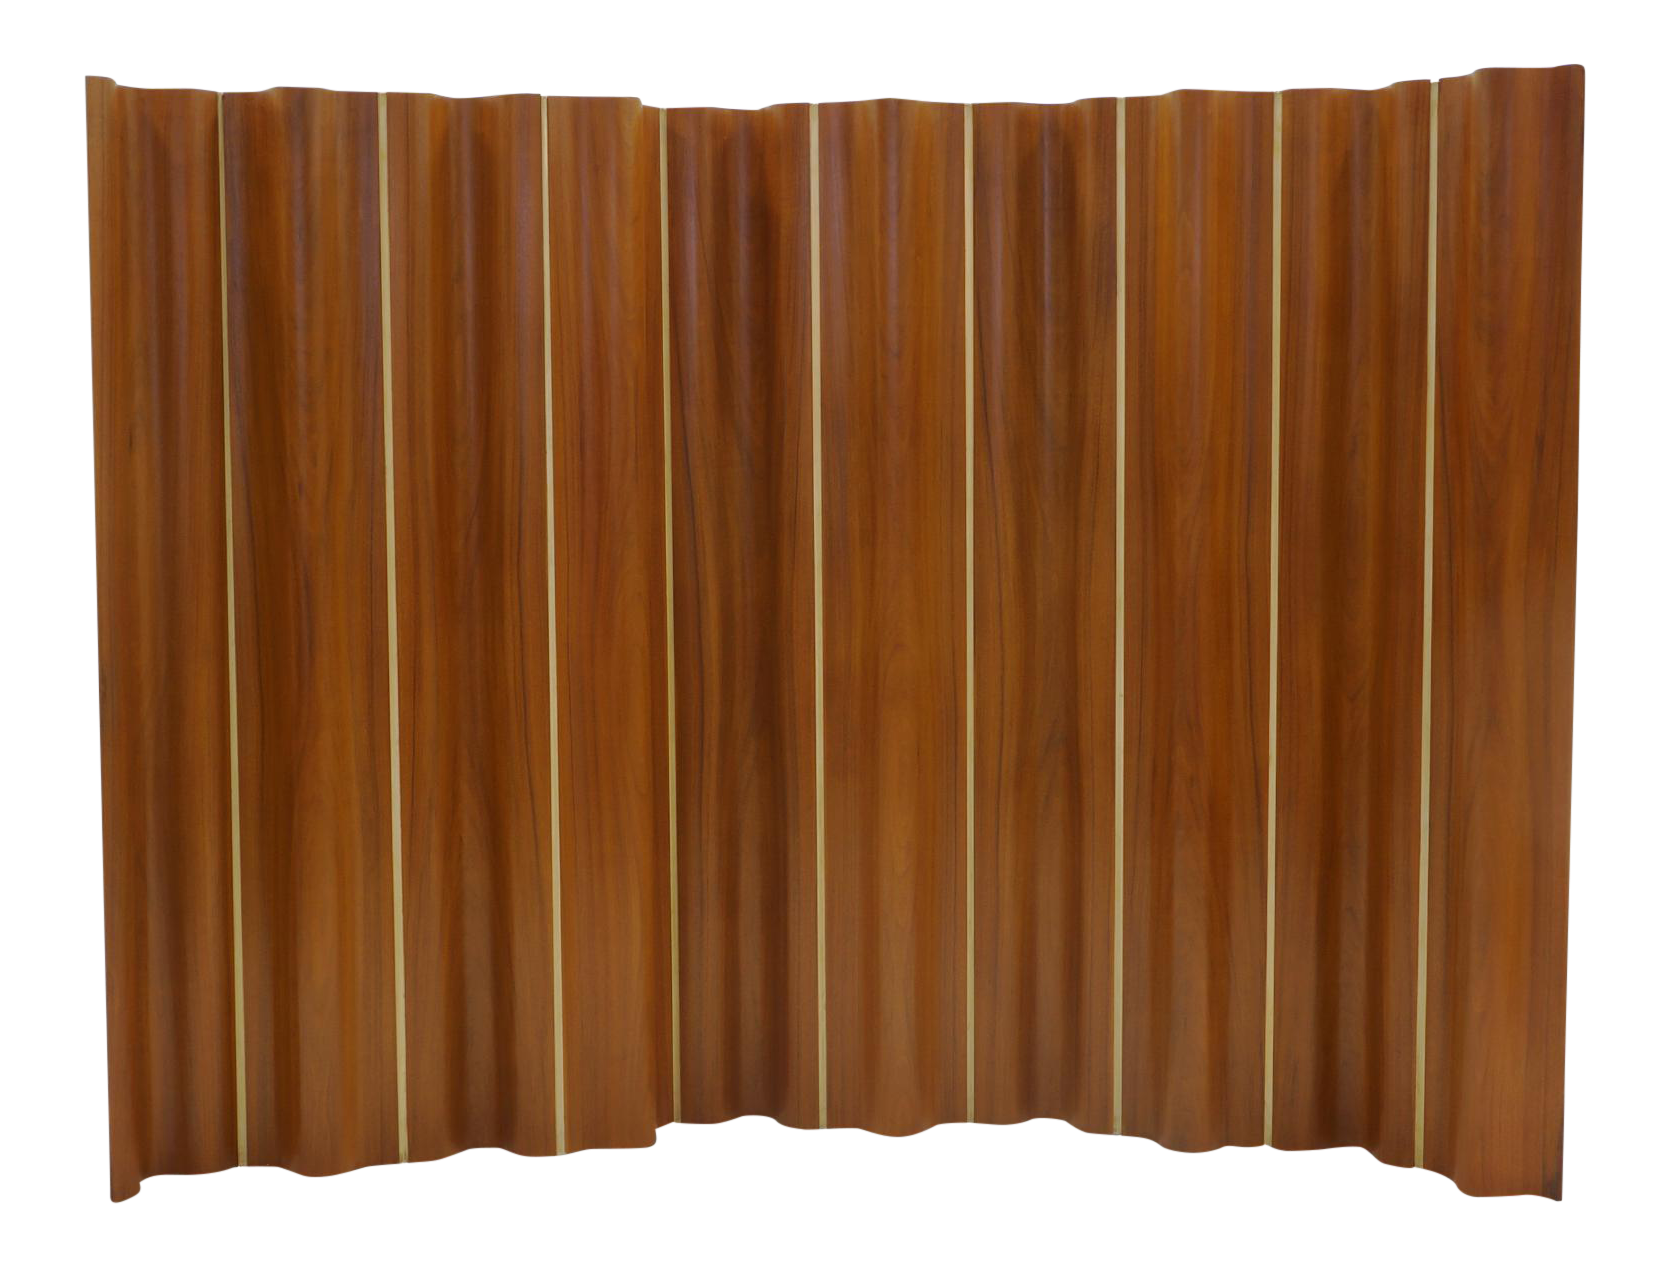 Folding Screen Picture Free Transparent Image HQ PNG Image